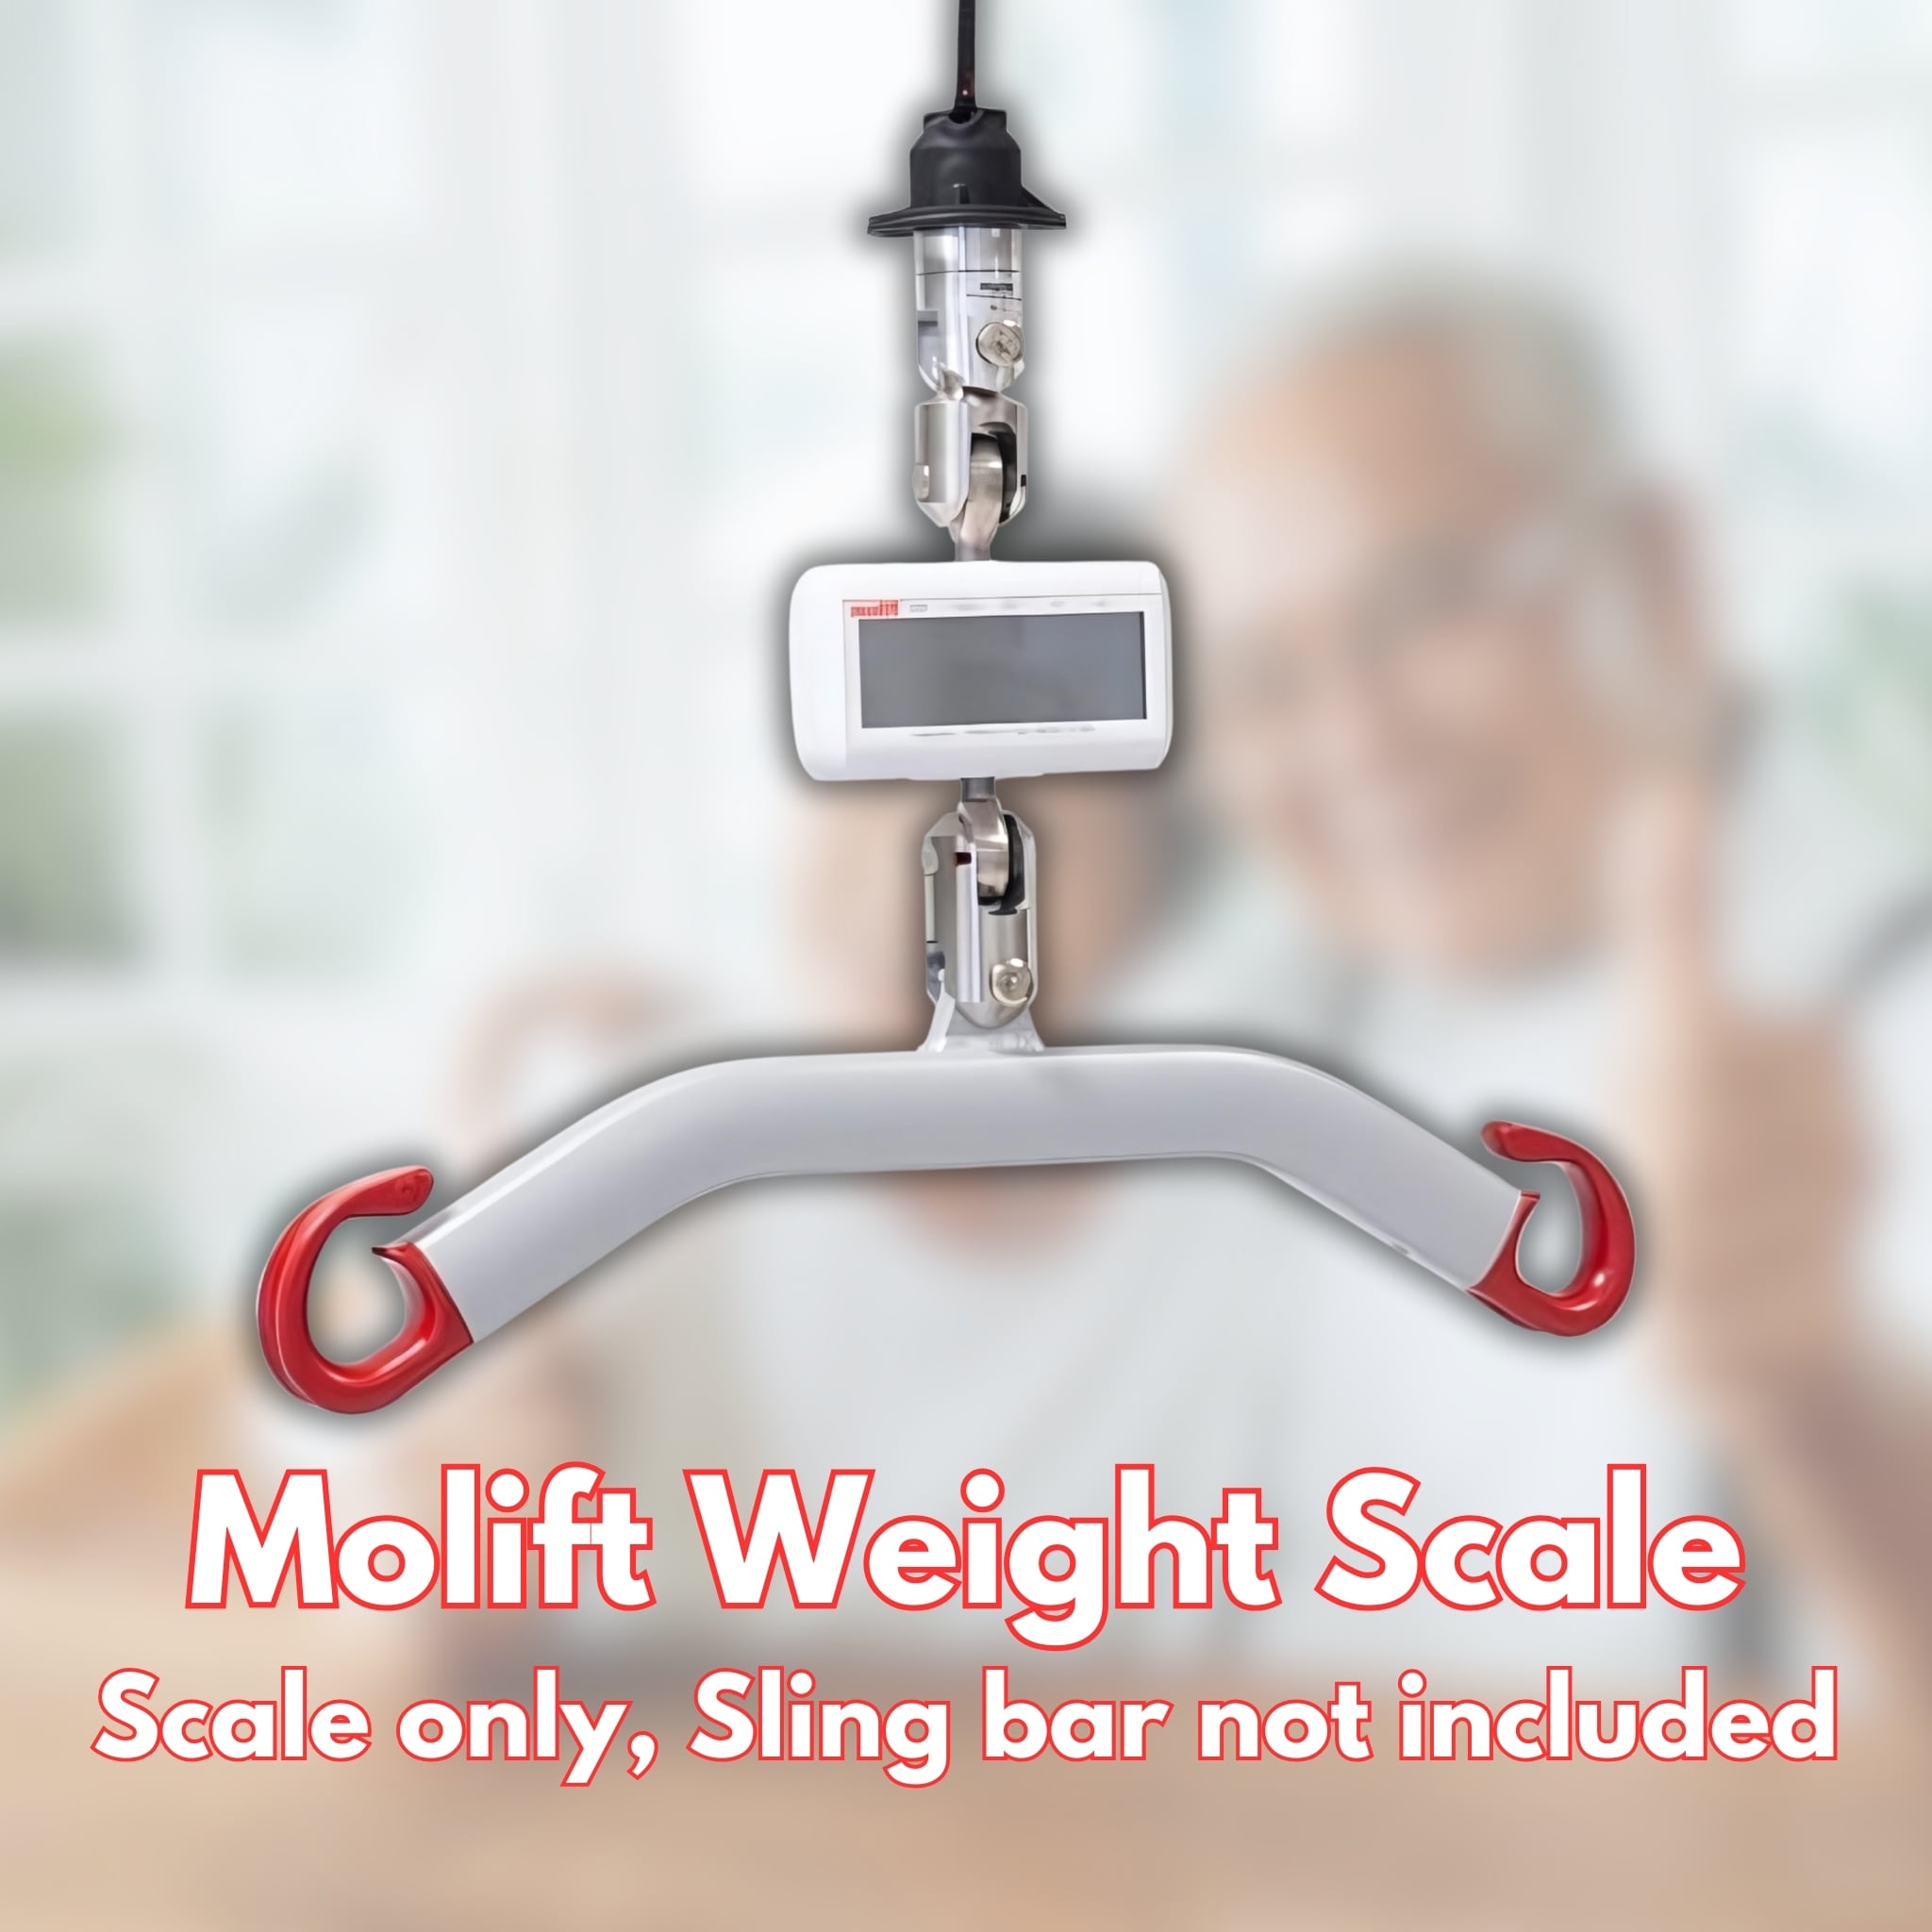 Molift Weight Scale (Scale only, Sling bar not included)